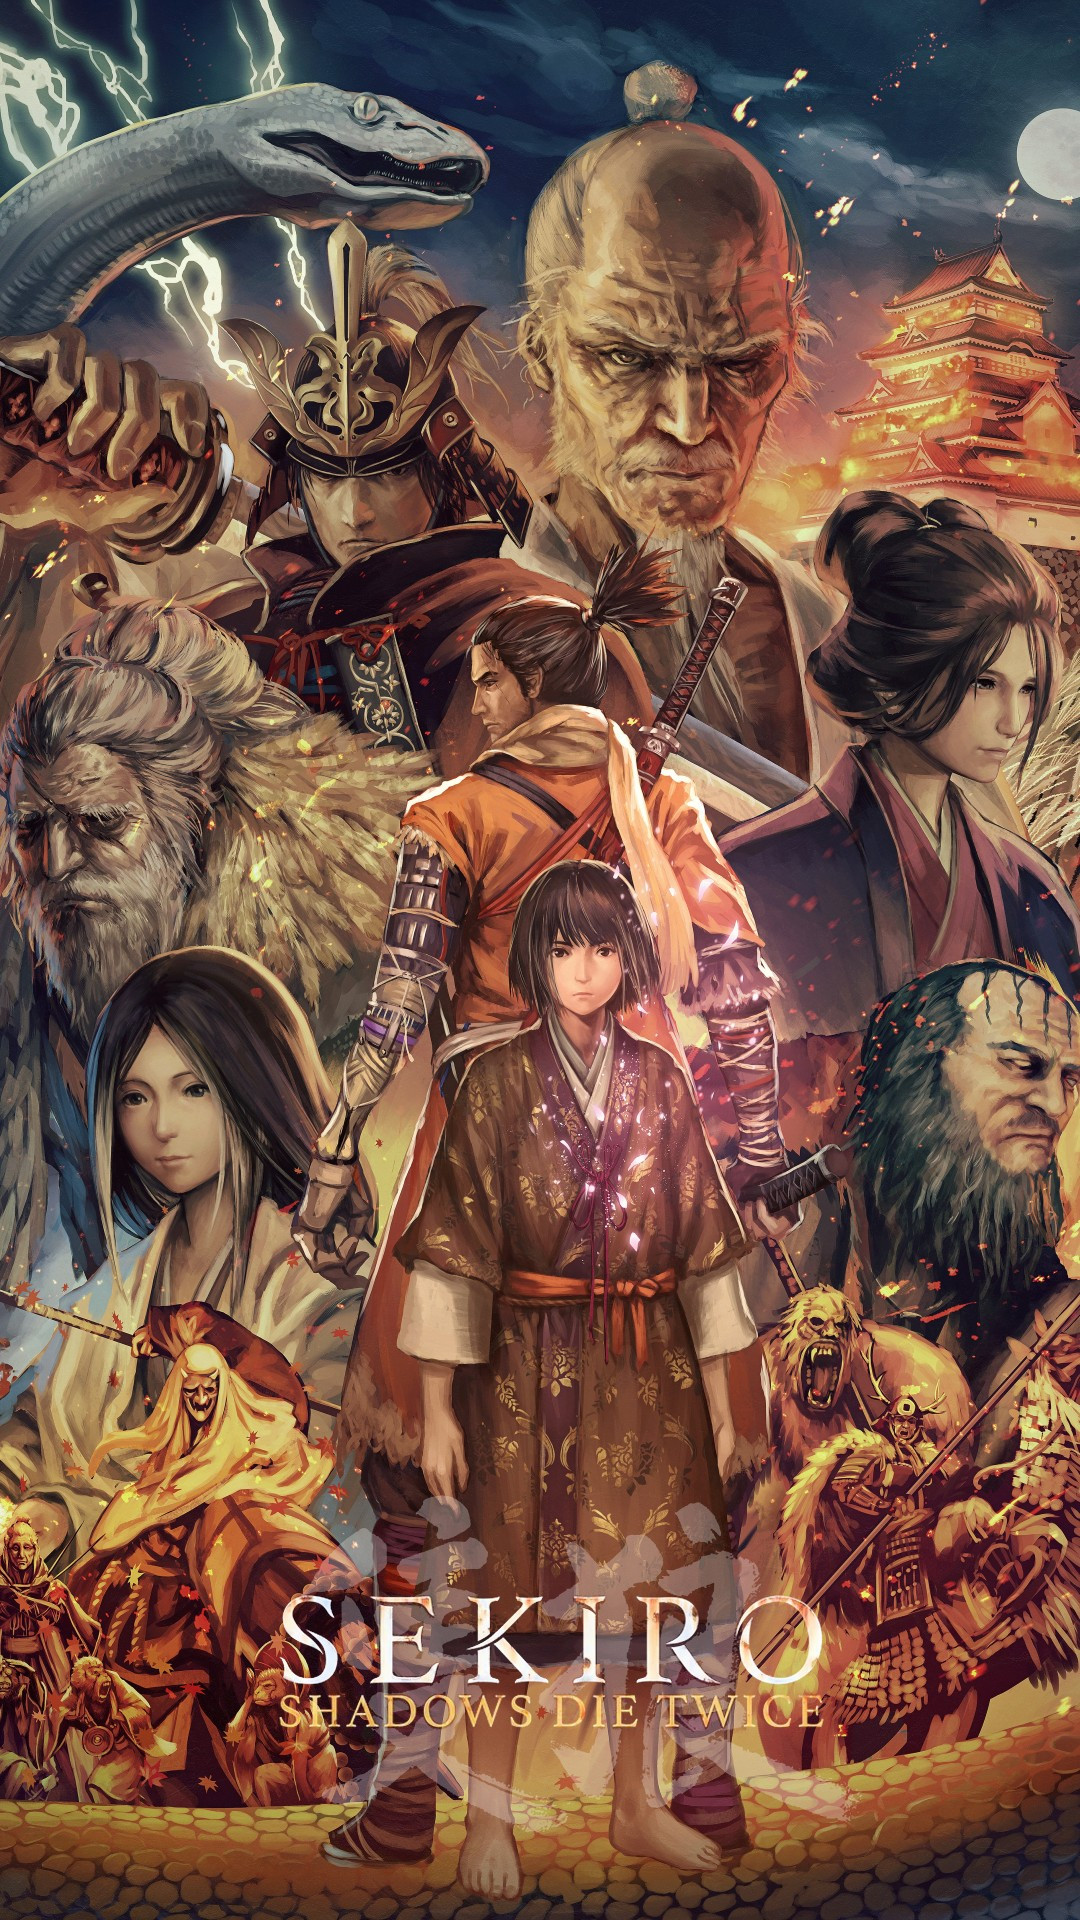 Download 1080x1920 Sekiro: Shadows Die Twice, Poster, Anime Style, Characters, Artwork Wallpaper for iPhone iPhone 7 Plus, iPhone 6+, Sony Xperia Z, HTC One